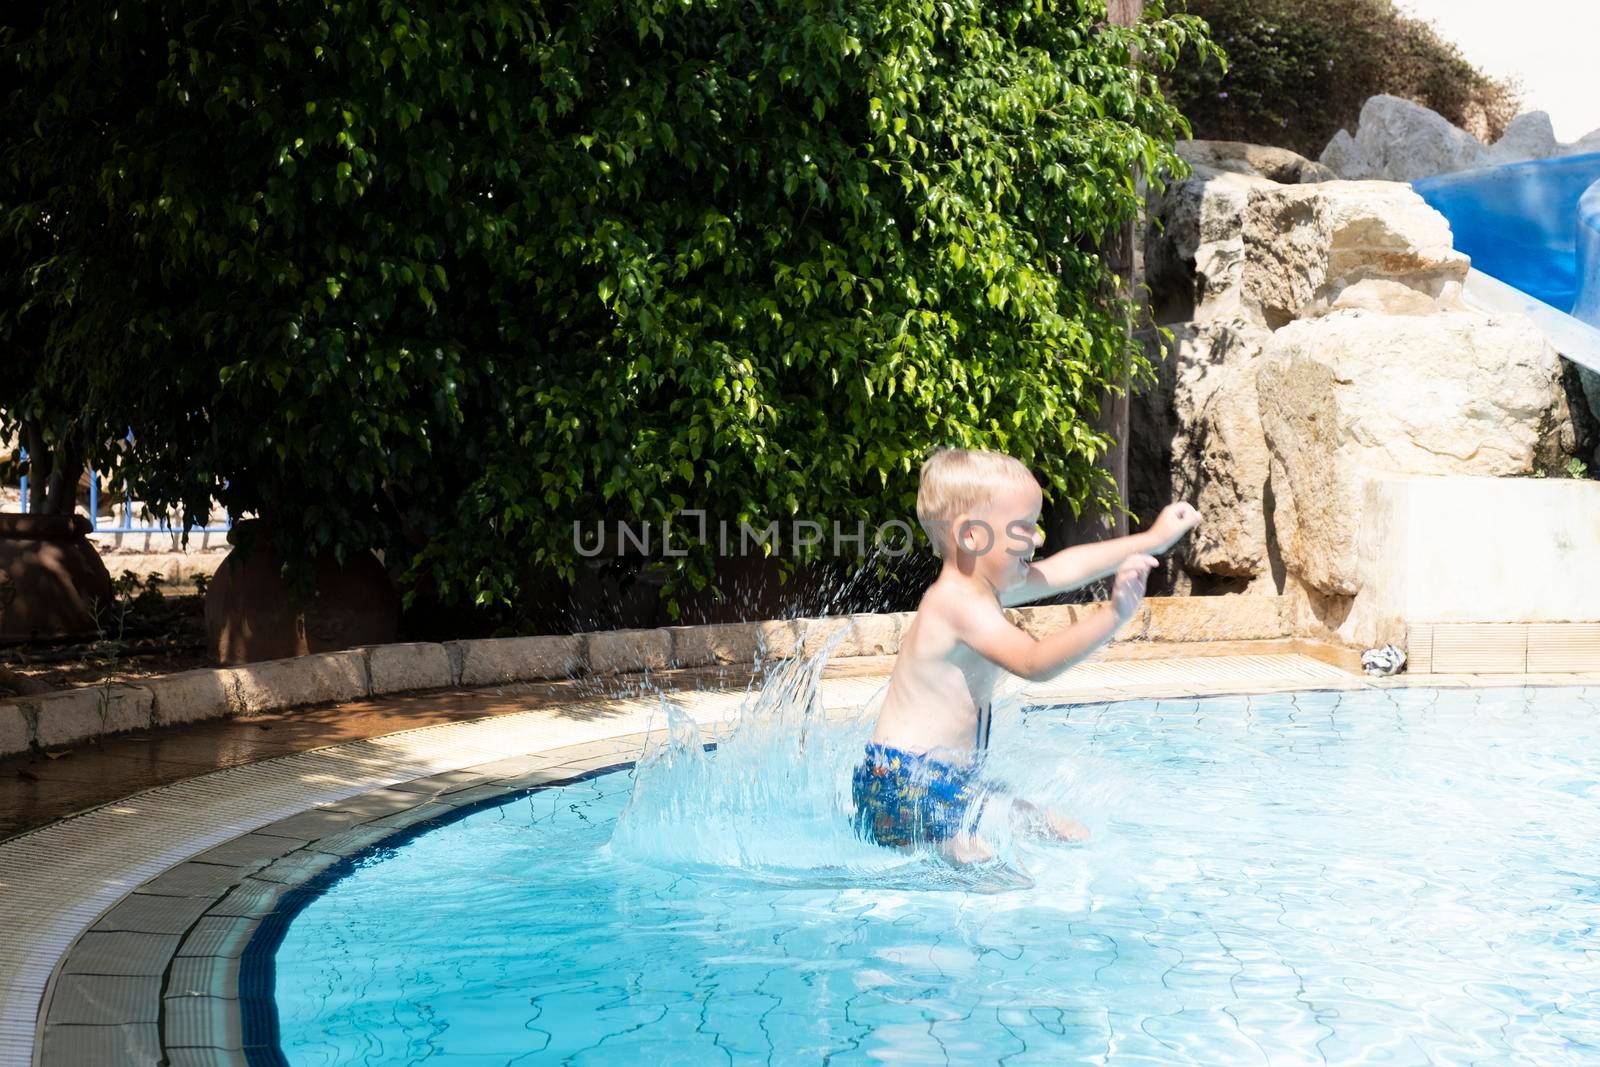 A happy smiling child jumps and dives under the water in the pool on a clear Sunny day.